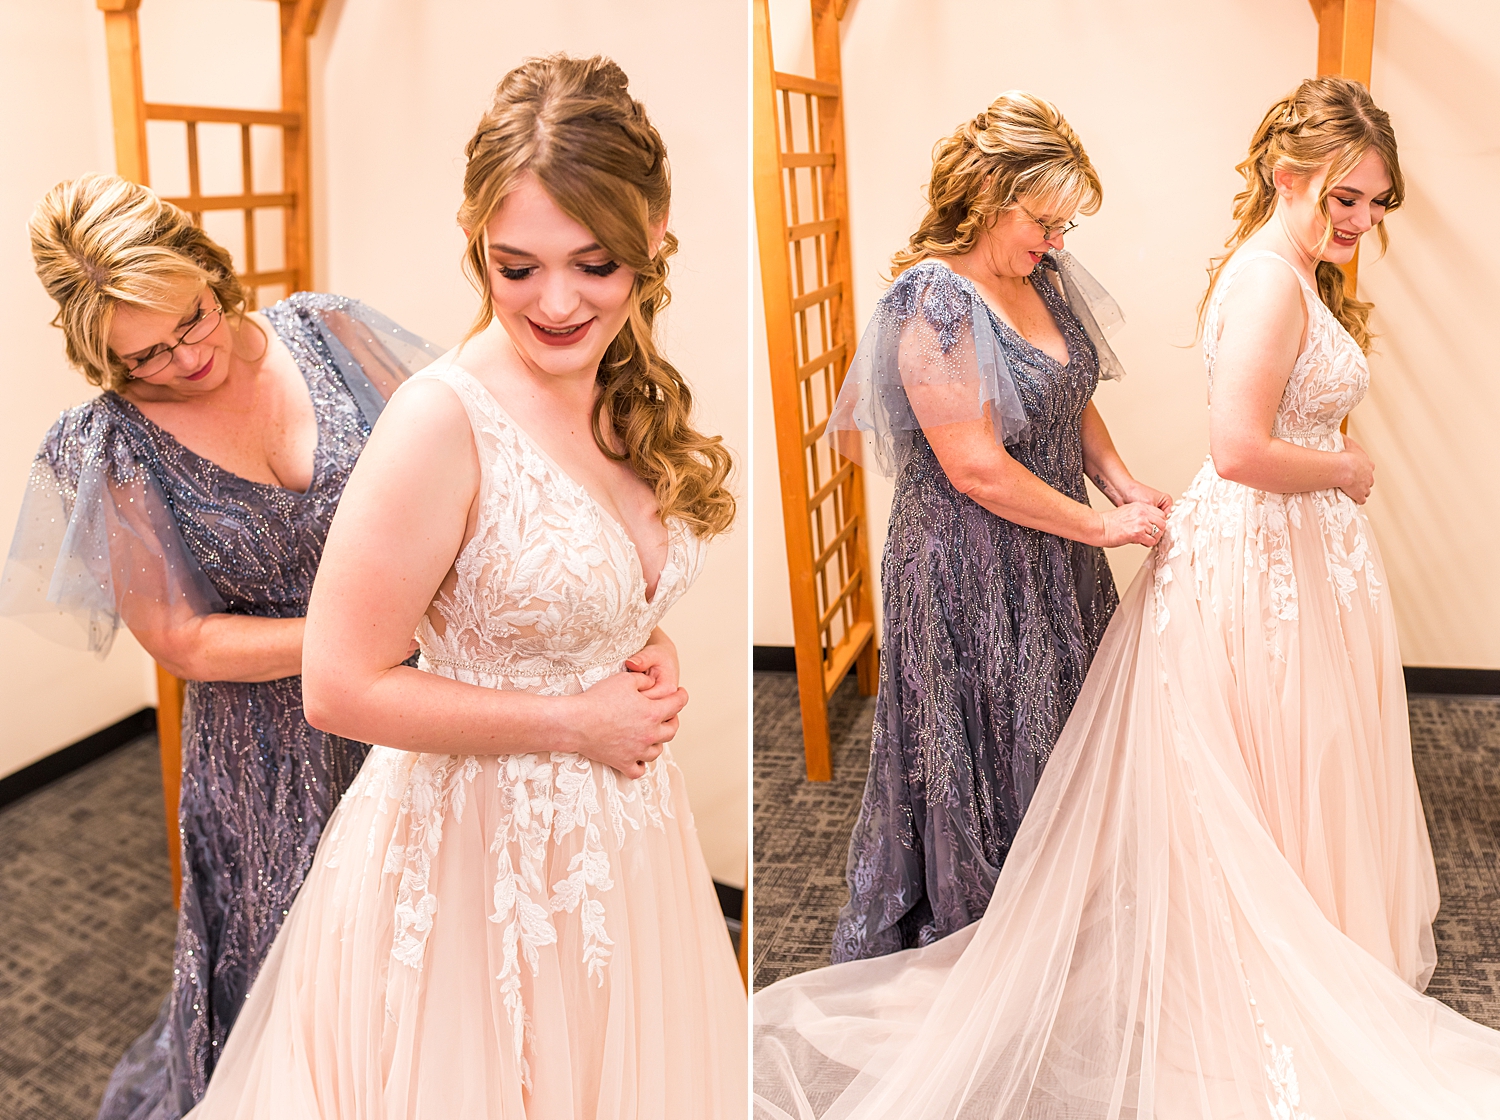 mother of the bride helps daughter into wedding dress